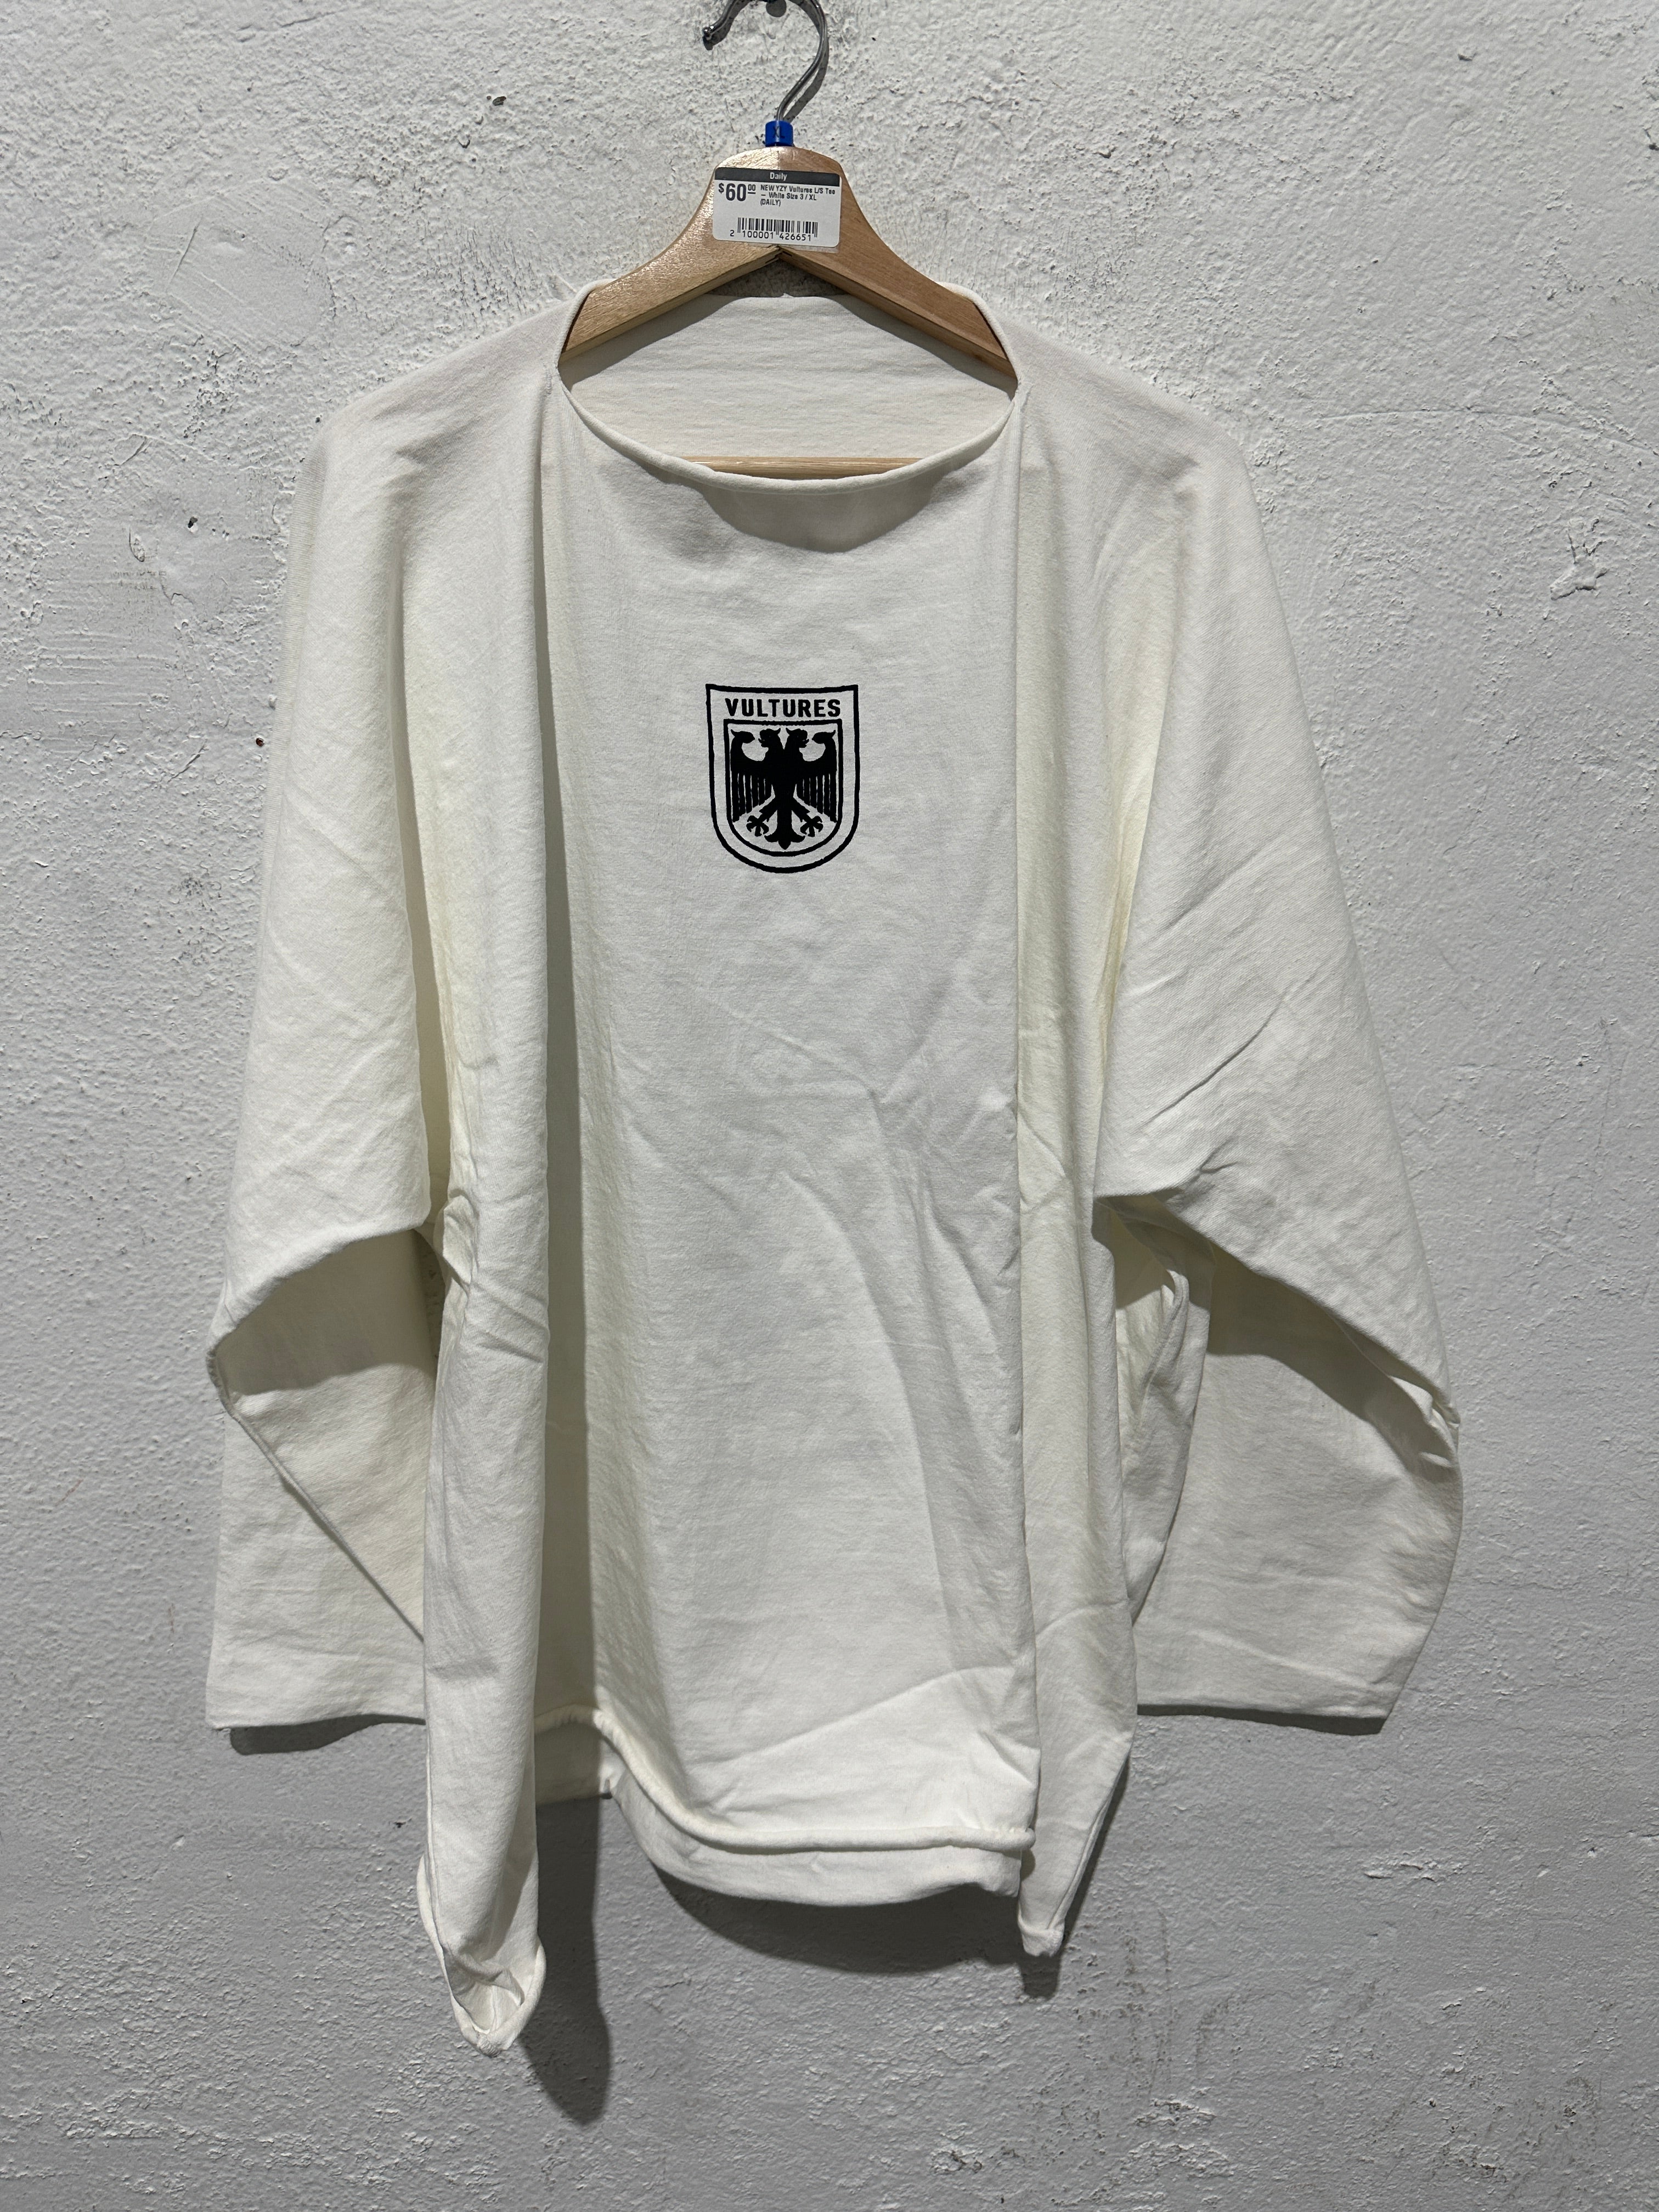 NEW YZY Vultures L/S Tee - White